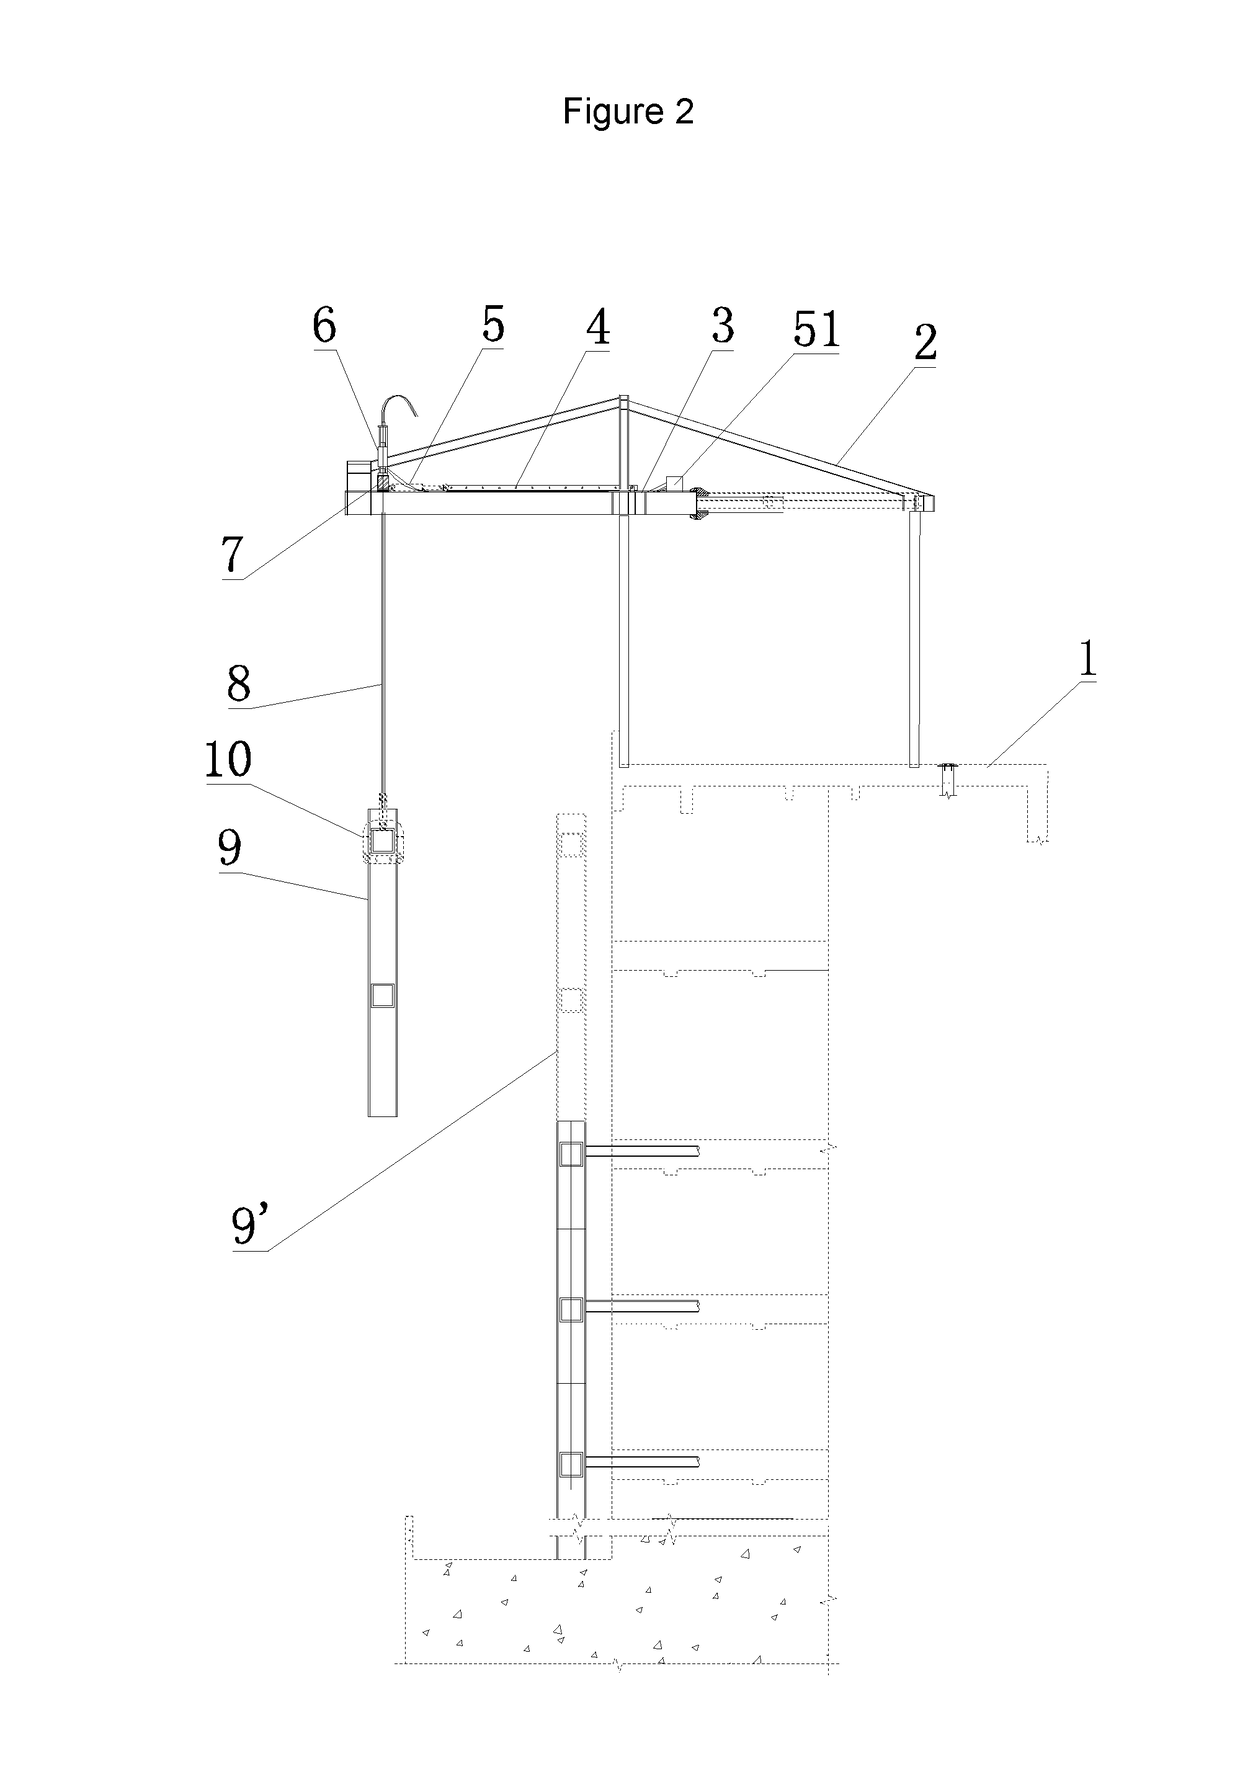 Apparatus and method for lifting and sliding a structure attached to the wall